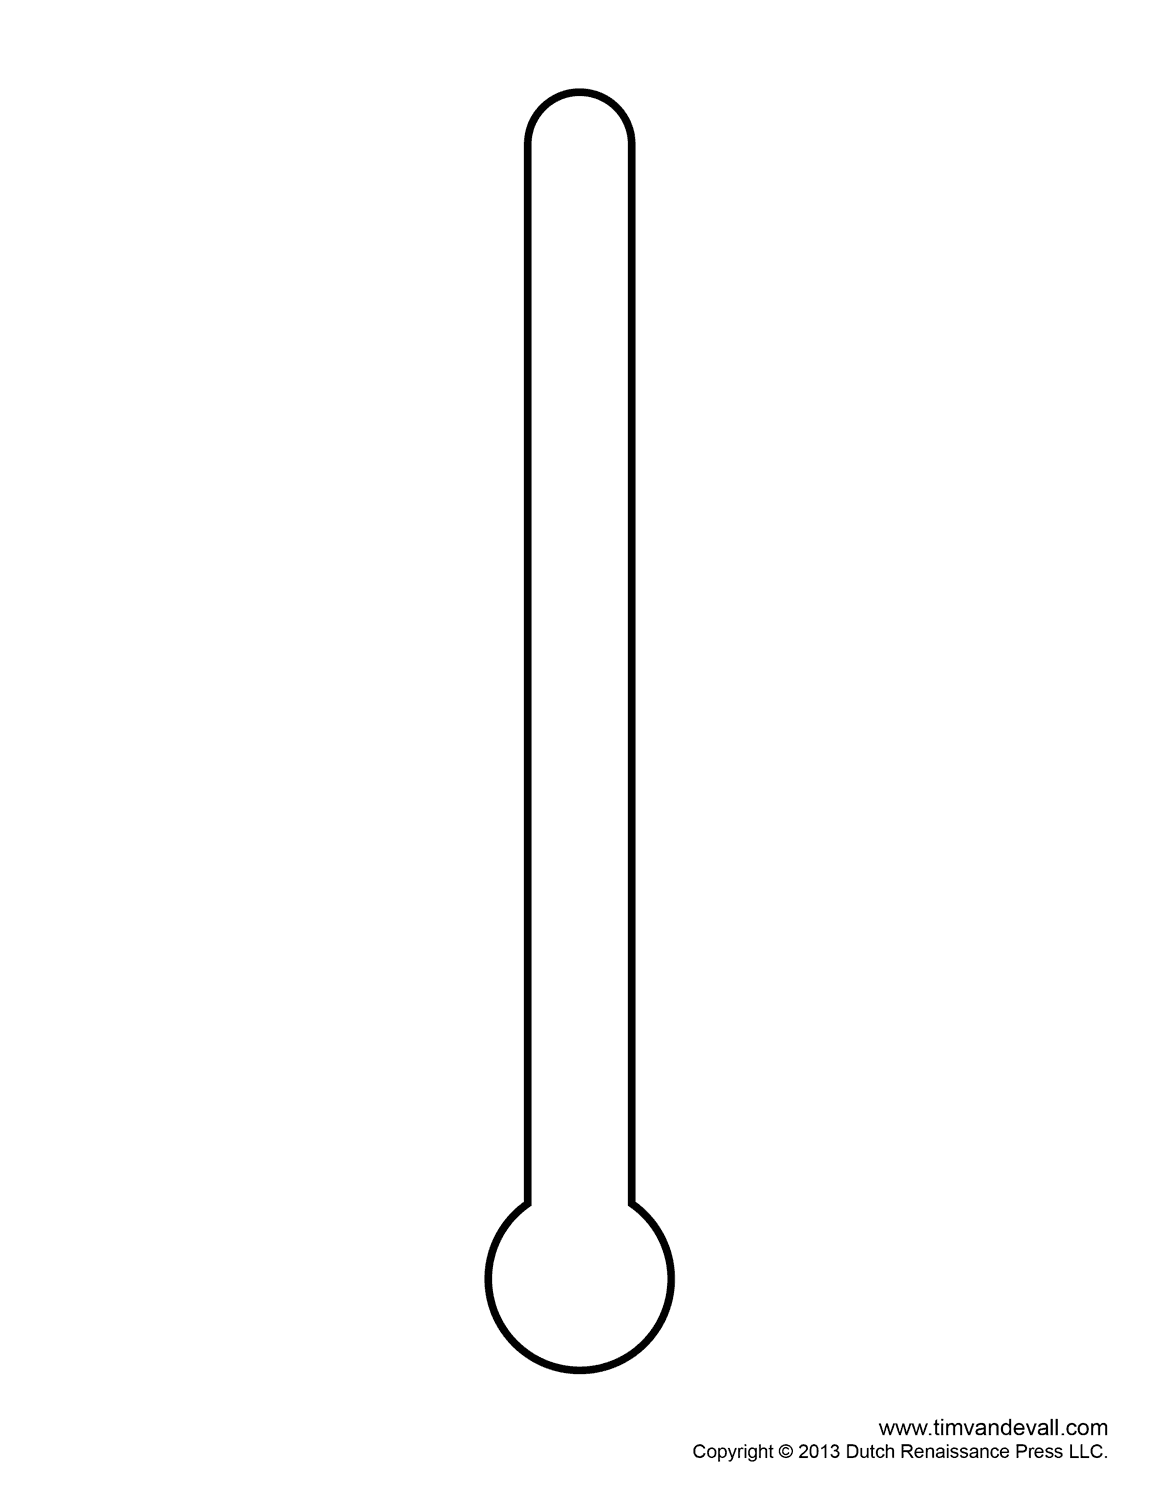 Blank Goal Thermometer Fundraising Thermometer